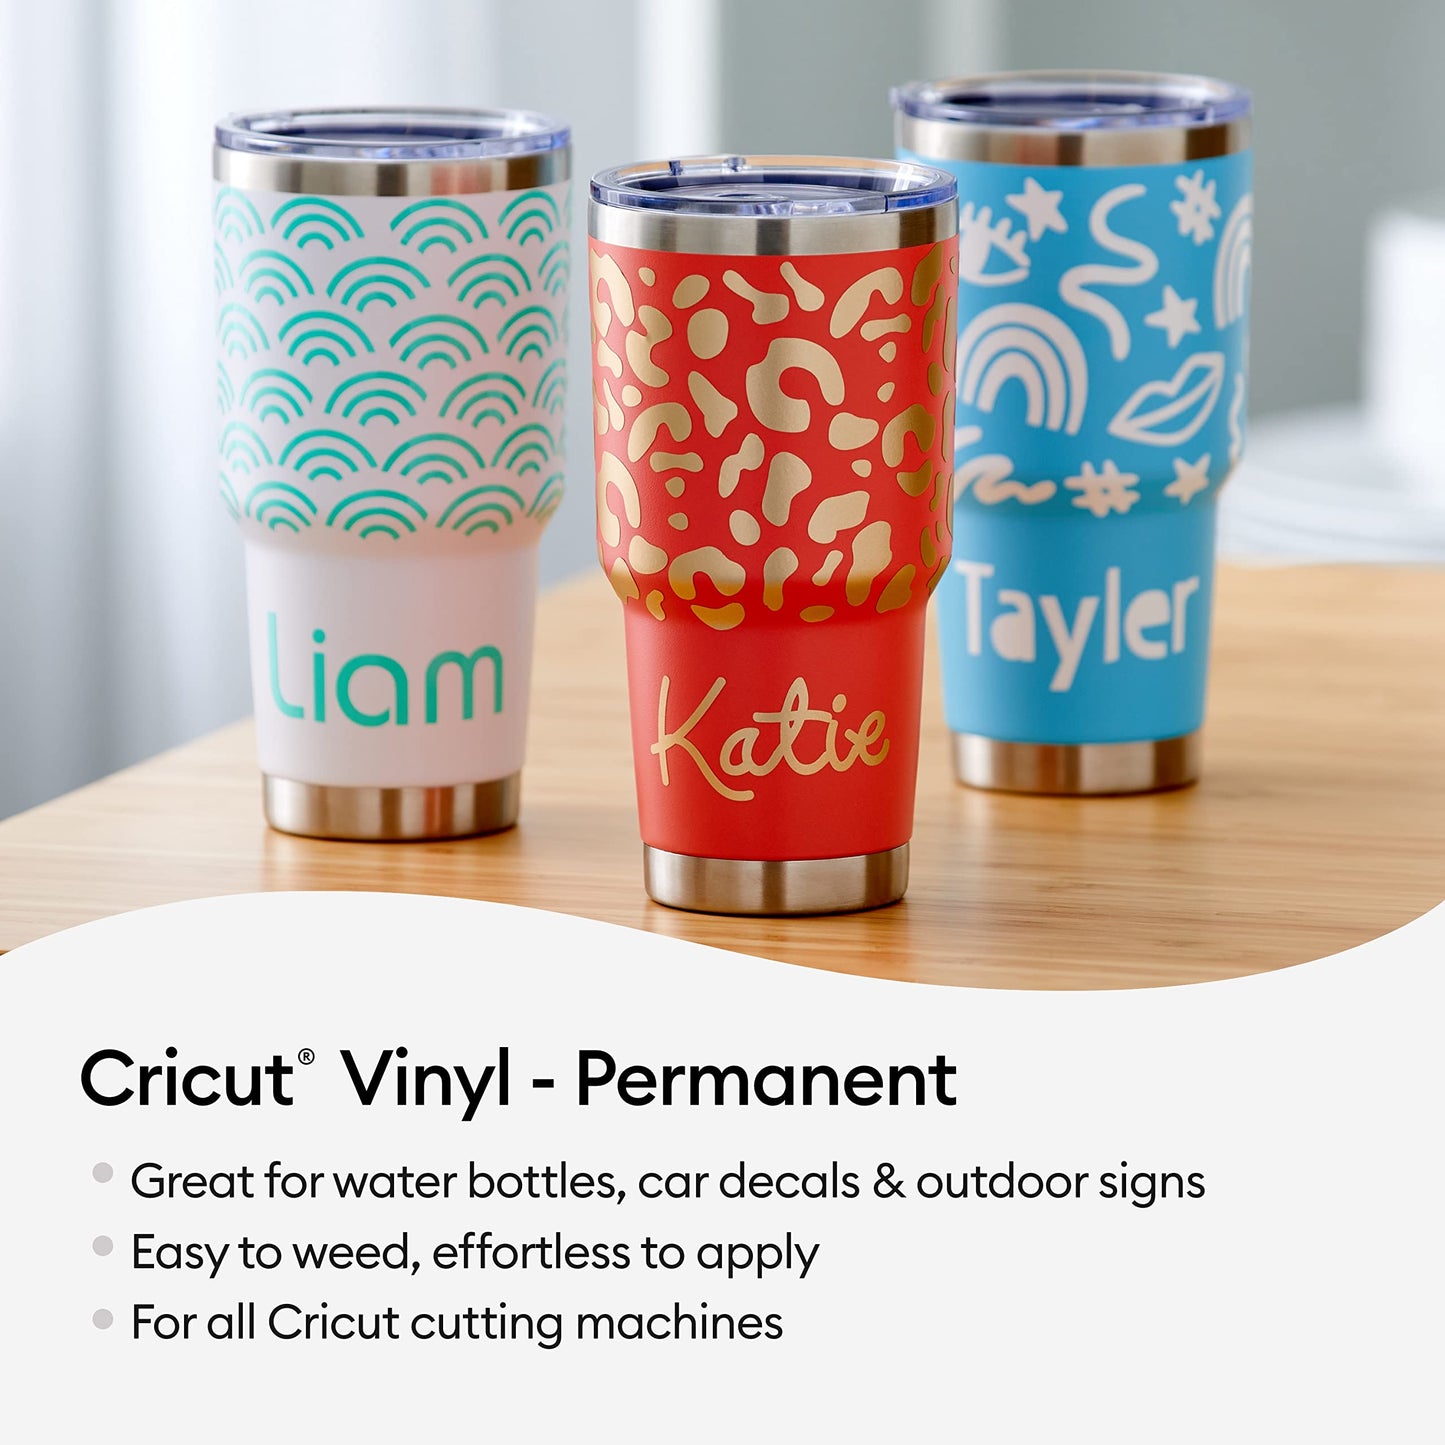 Cricut Vinyl Permanent - Everything Sampler, 12x12 Vinyl Sheets and Transfer Tapes, Create Long-Lasting DIY Projects, Durable Adhesive Vinyl for